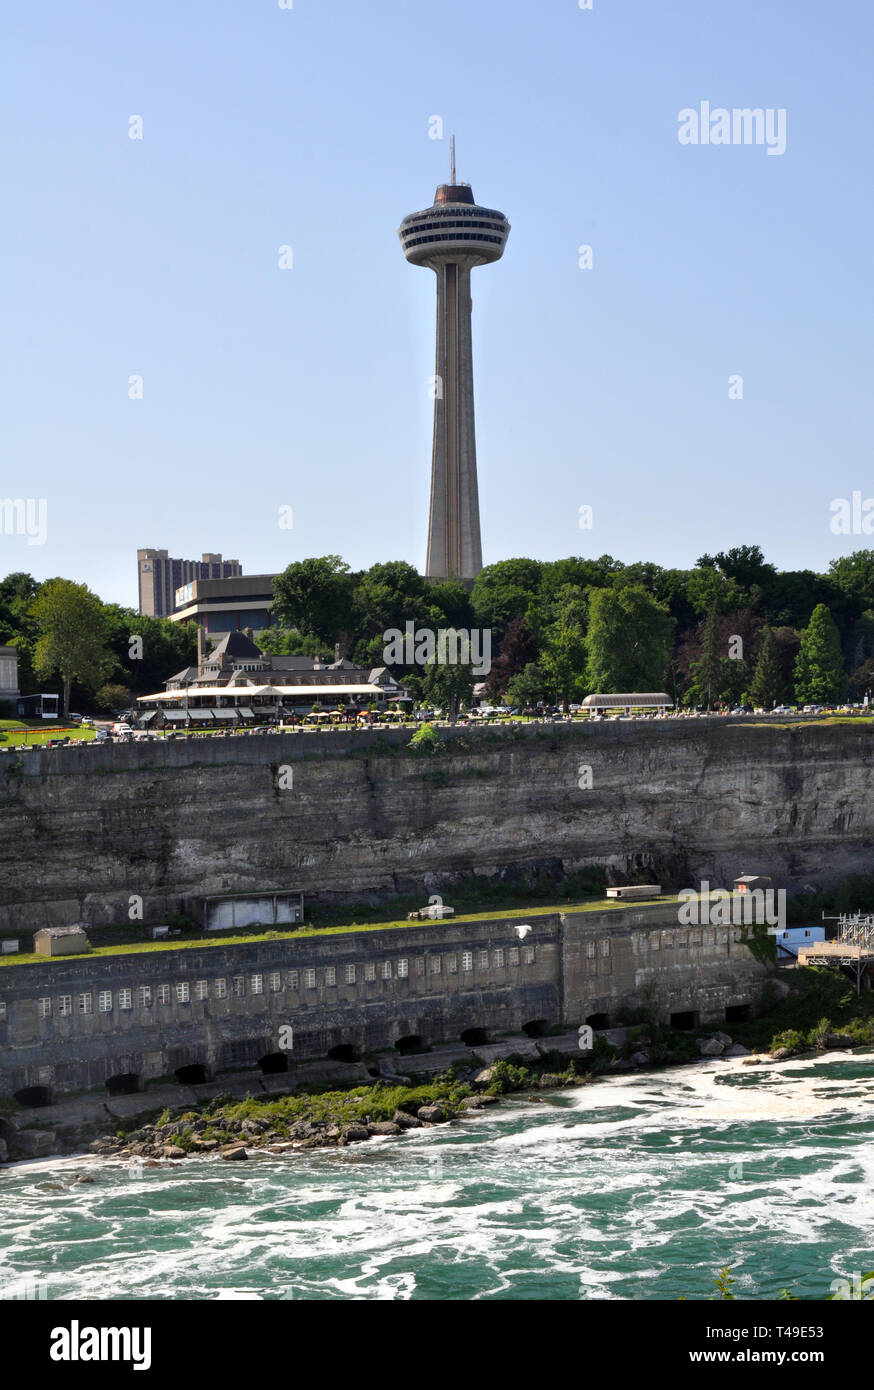 A View of Skylon Tower and the old Niagara Hydroelectric power plant below along the river at Niagara Falls Canada Stock Photo